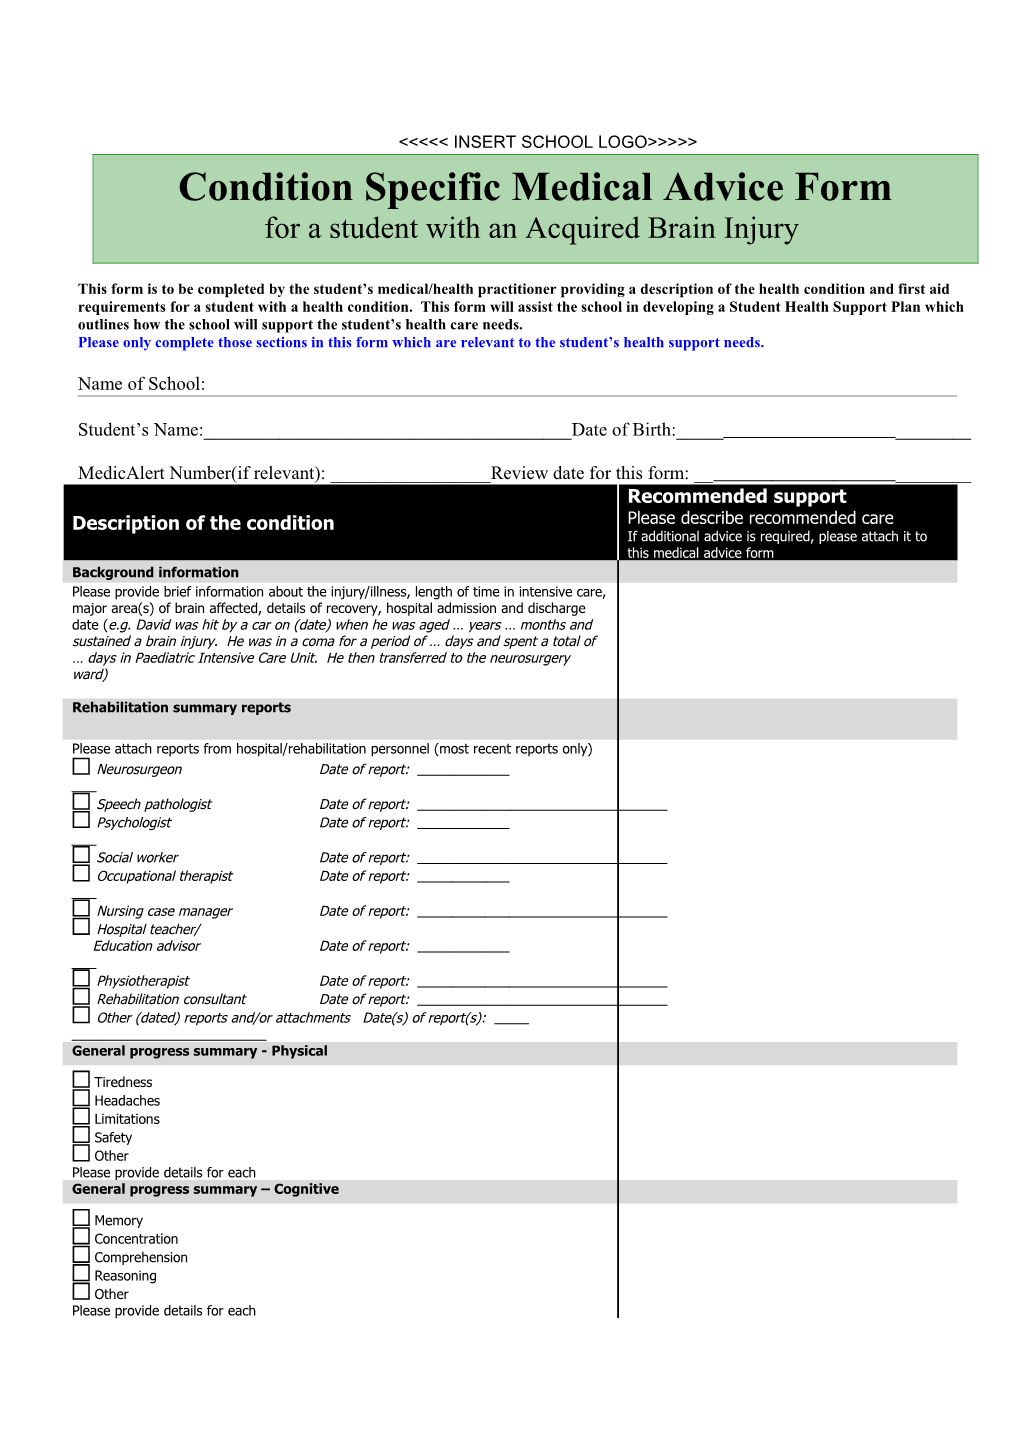 Condition Specific Medical Advice Form: Brain Injury